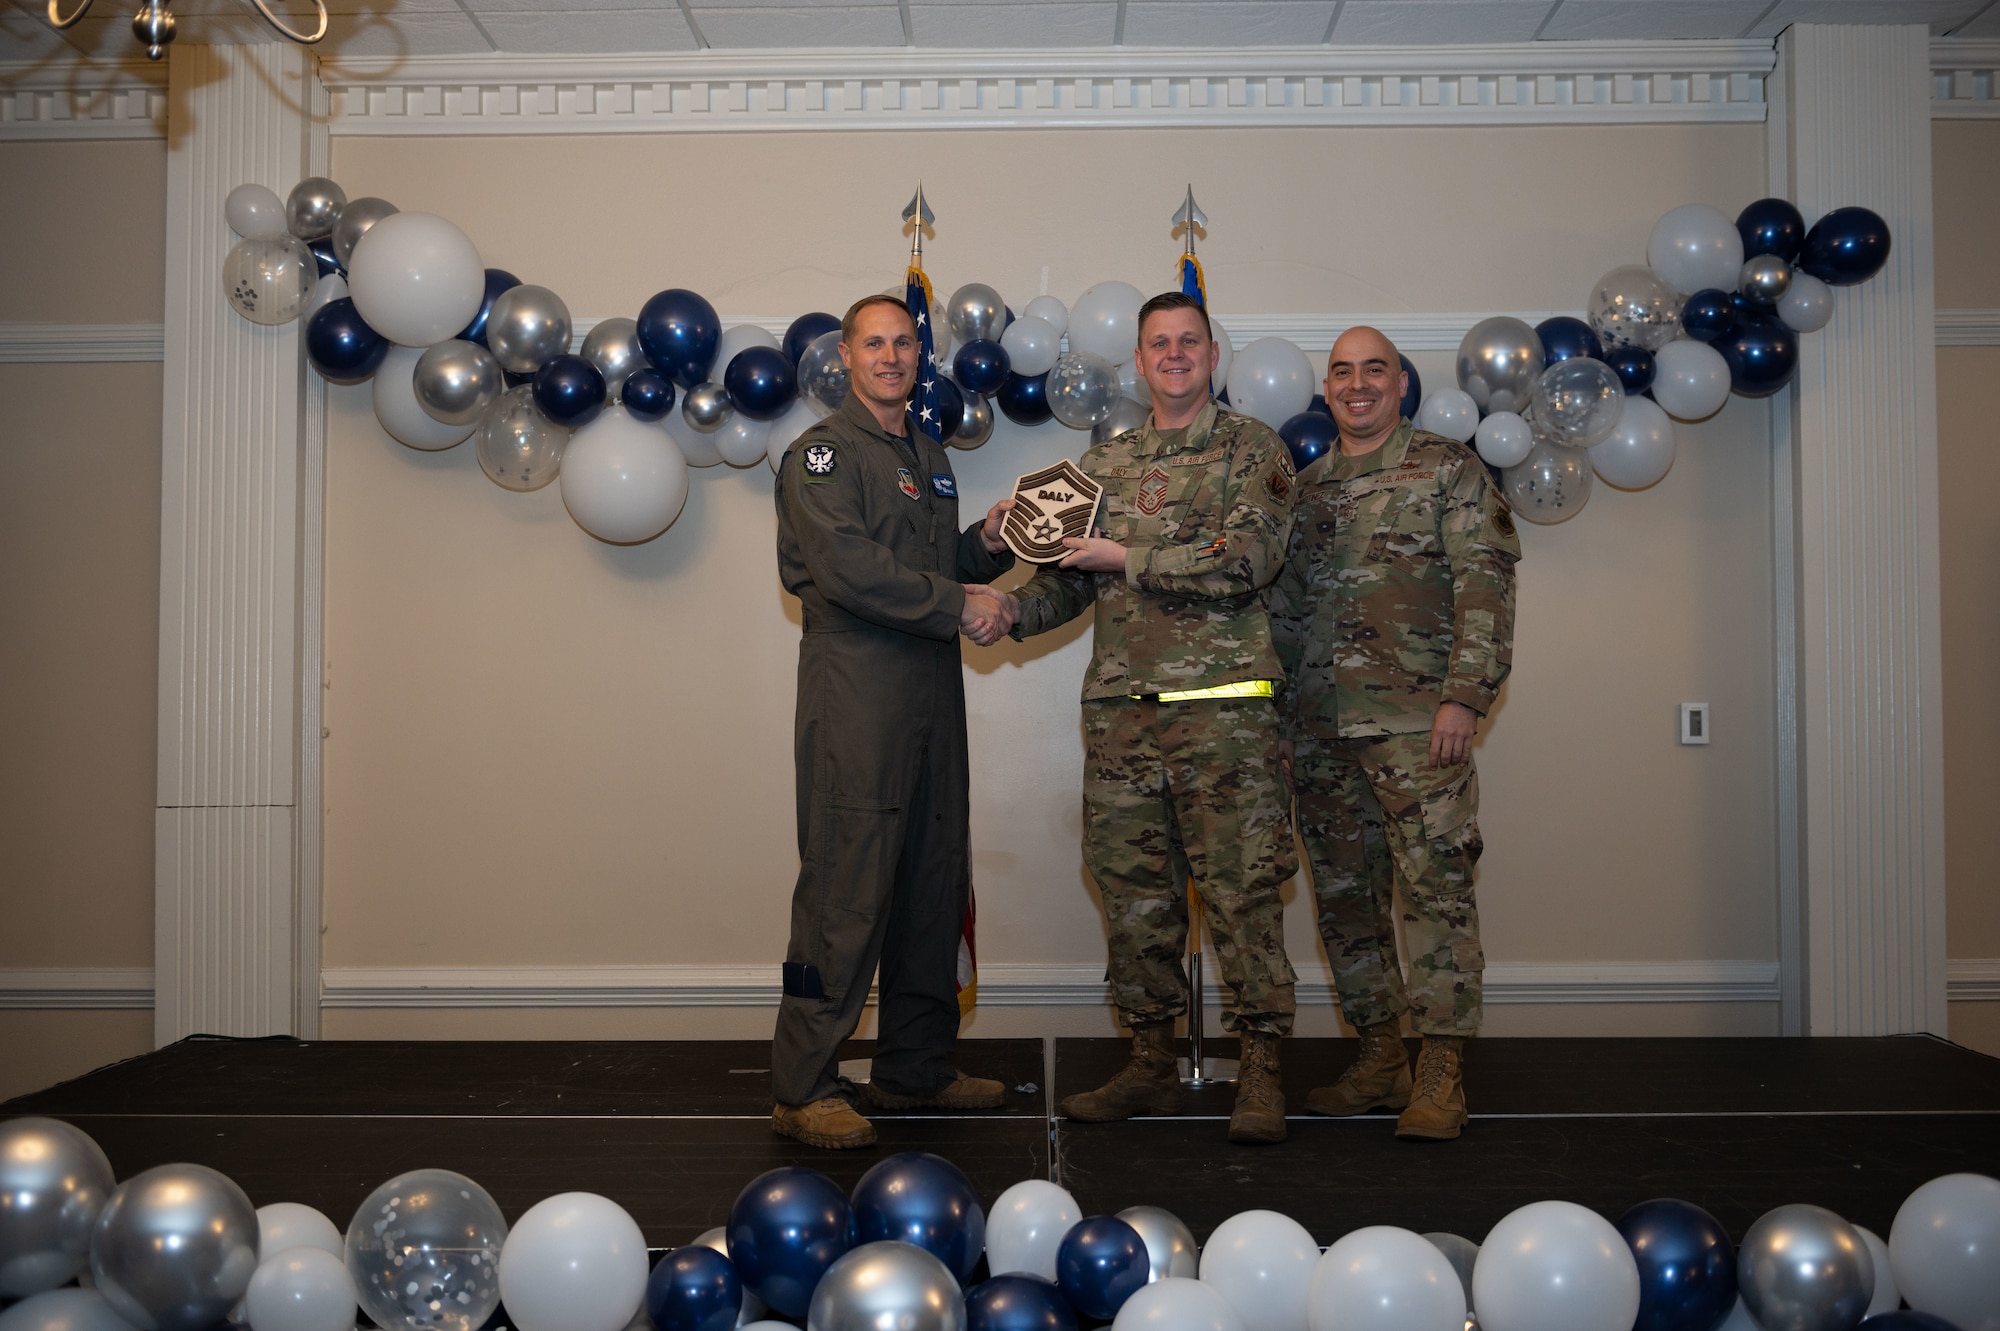 Col. Lucas Teel, 4th Fighter Wing commander, and Chief Master Sgt. Peter Martinez, 4th FW command chief, present a plaque to Senior Master Sgt. select Joshua Daly, 336th Fighter Squadron production superintendent, during the senior master sergeant release ceremony at Seymour Johnson Air Force Base, North Carolina, March 17, 2023. The ceremony allowed wing leadership, family and friends to recognize the base’s newest Senior Master Sergeant selects. (U.S. Air Force photo by Airman 1st Class Rebecca Sirimarco-Lang)